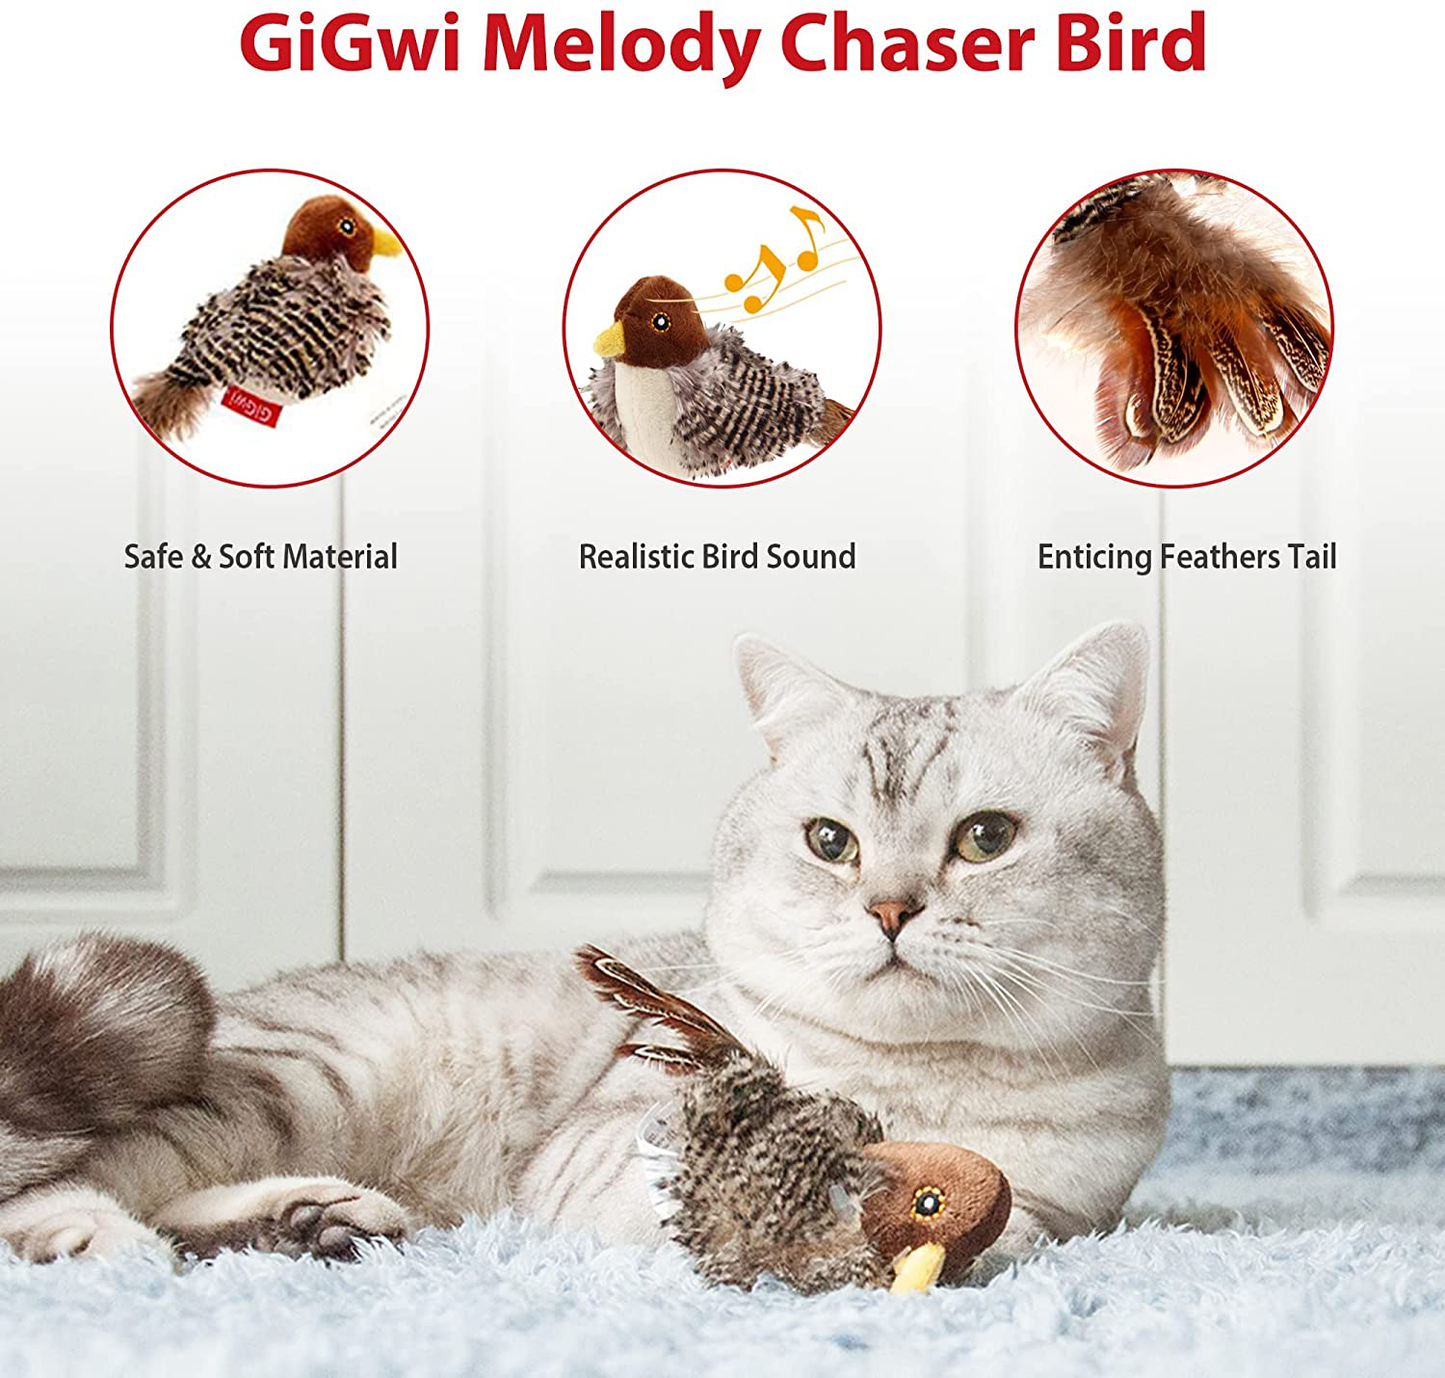 Gigwi Interactive Cat Toys Animal Sound Interactive Squeaking Cat Toys Melody Chaser & Toys for Cats to Play Alone,Play and Squeak Kitten Toy for Boredom